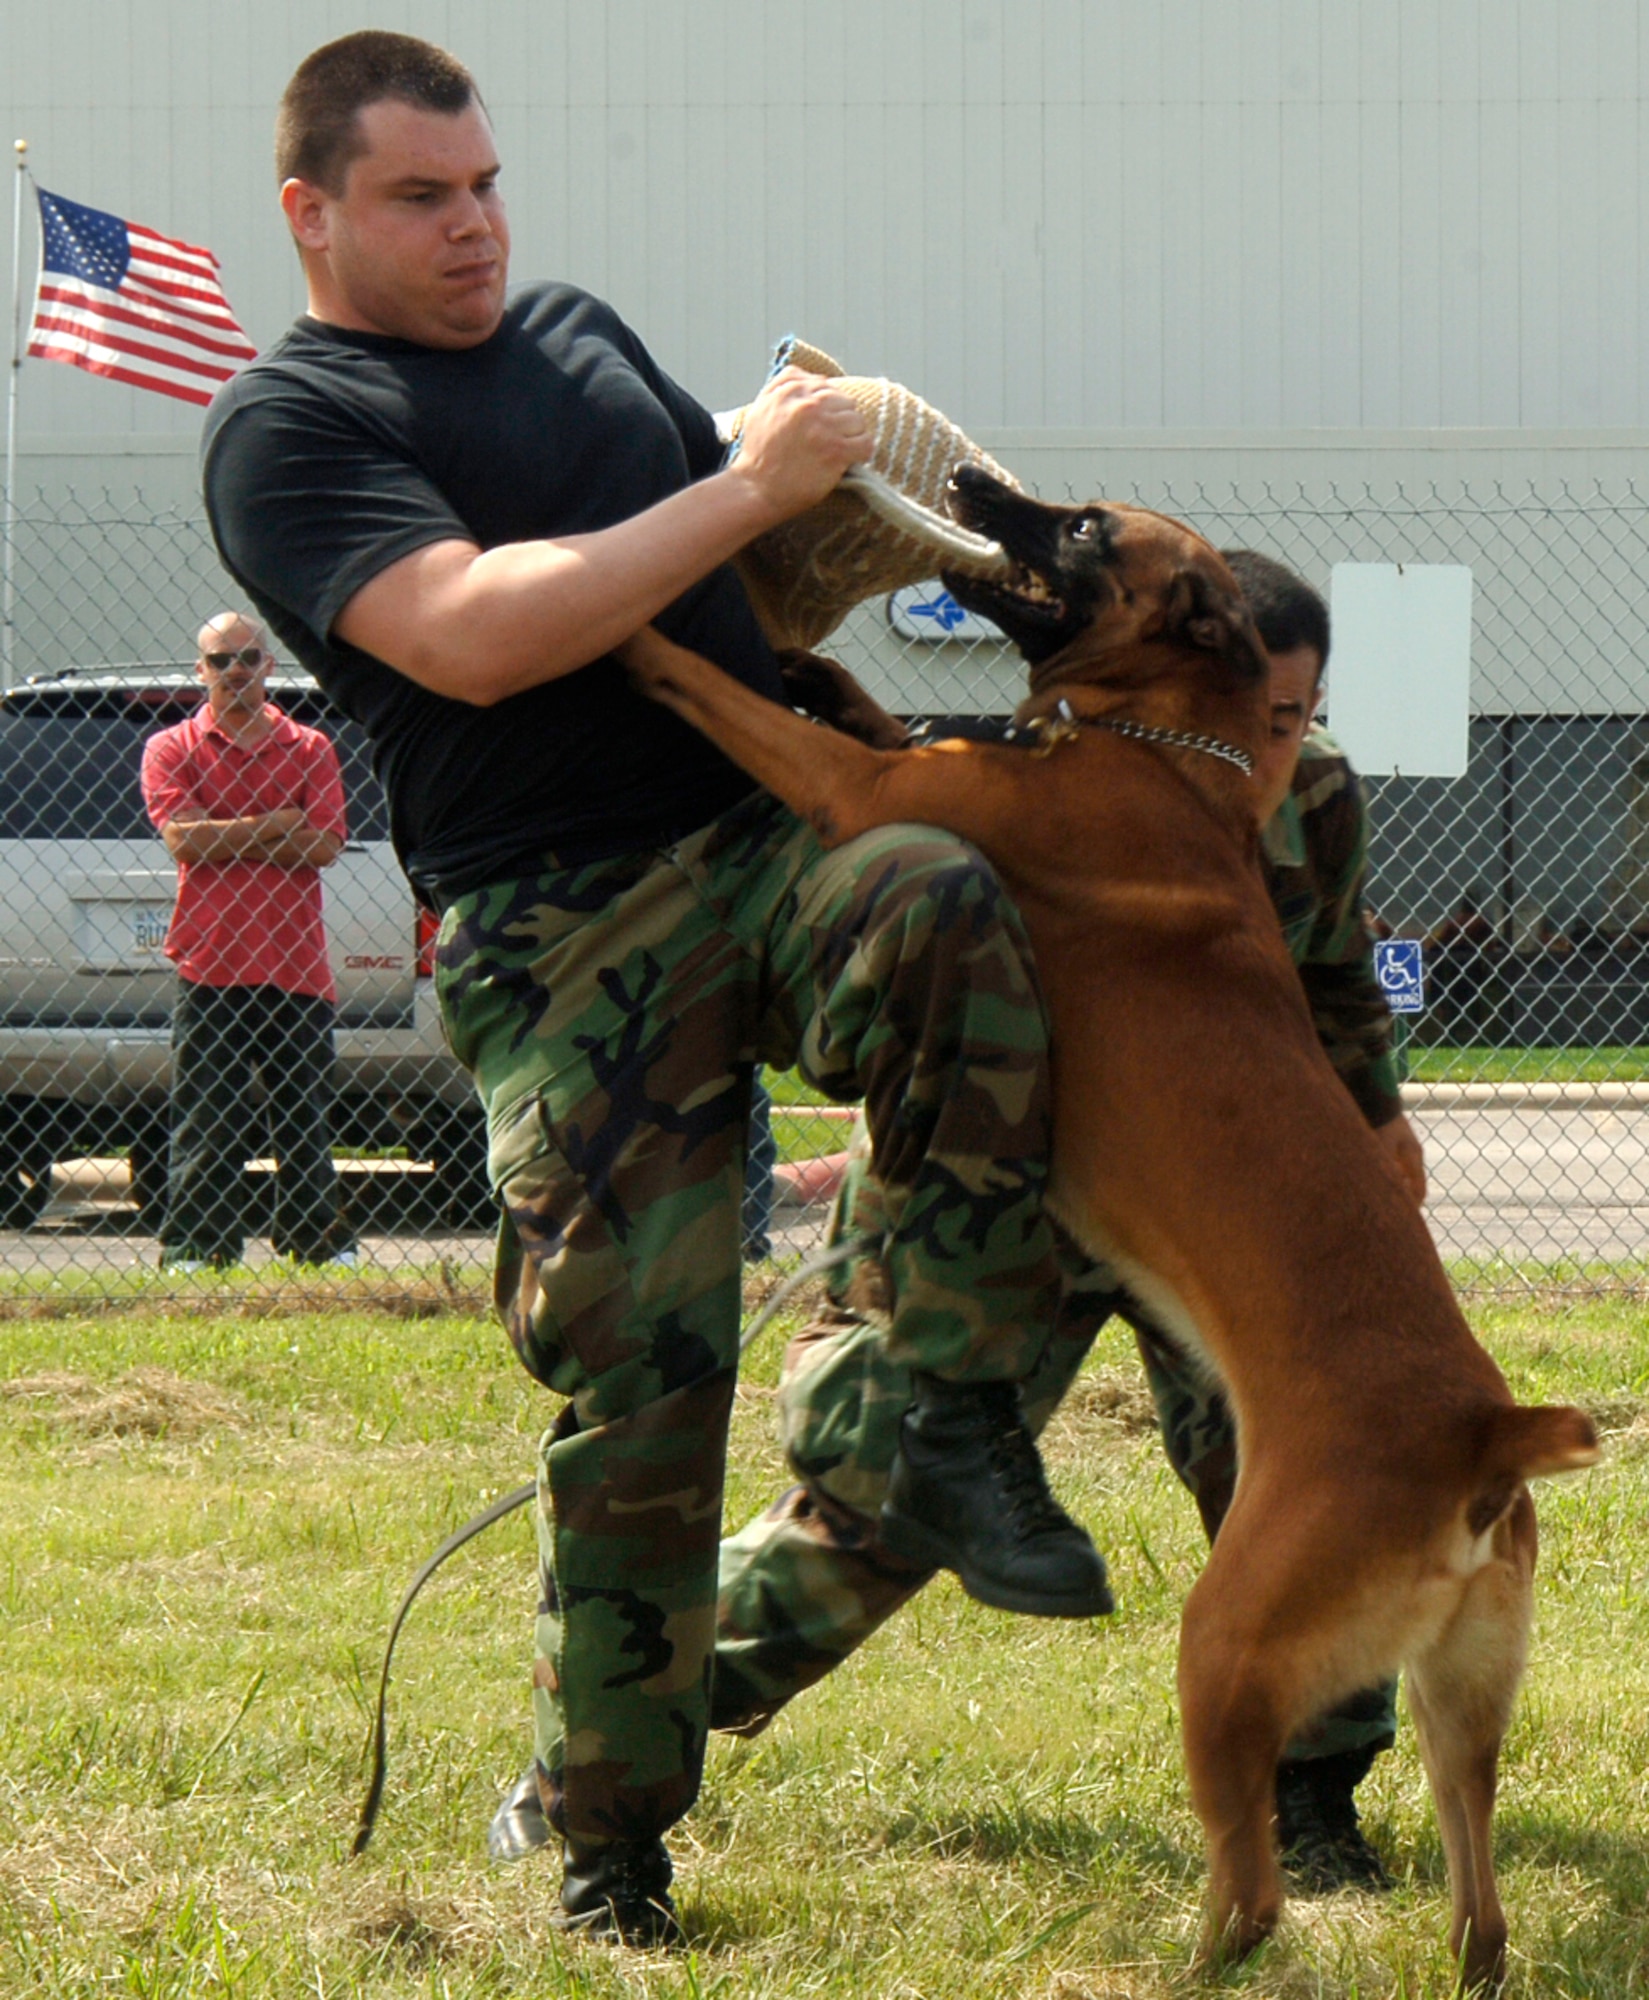 MCCONNELL AIR FORCE BASE, Kan. -- Staff Sgt. Matthew Ellgen and Senior Airman Juan Garcia, 22nd Security Forces Squadron, wrestle with Bram, military working dog, at the Colonel James Jabara Airport during the Wichita Flight Festival, Aug. 23. The military working dog demonstration team educates the surrounding community on their ability to use K-9s to support law enforcement on the local base and in a deployed contingency. (Photo by Senior Airman Laura Suttles)